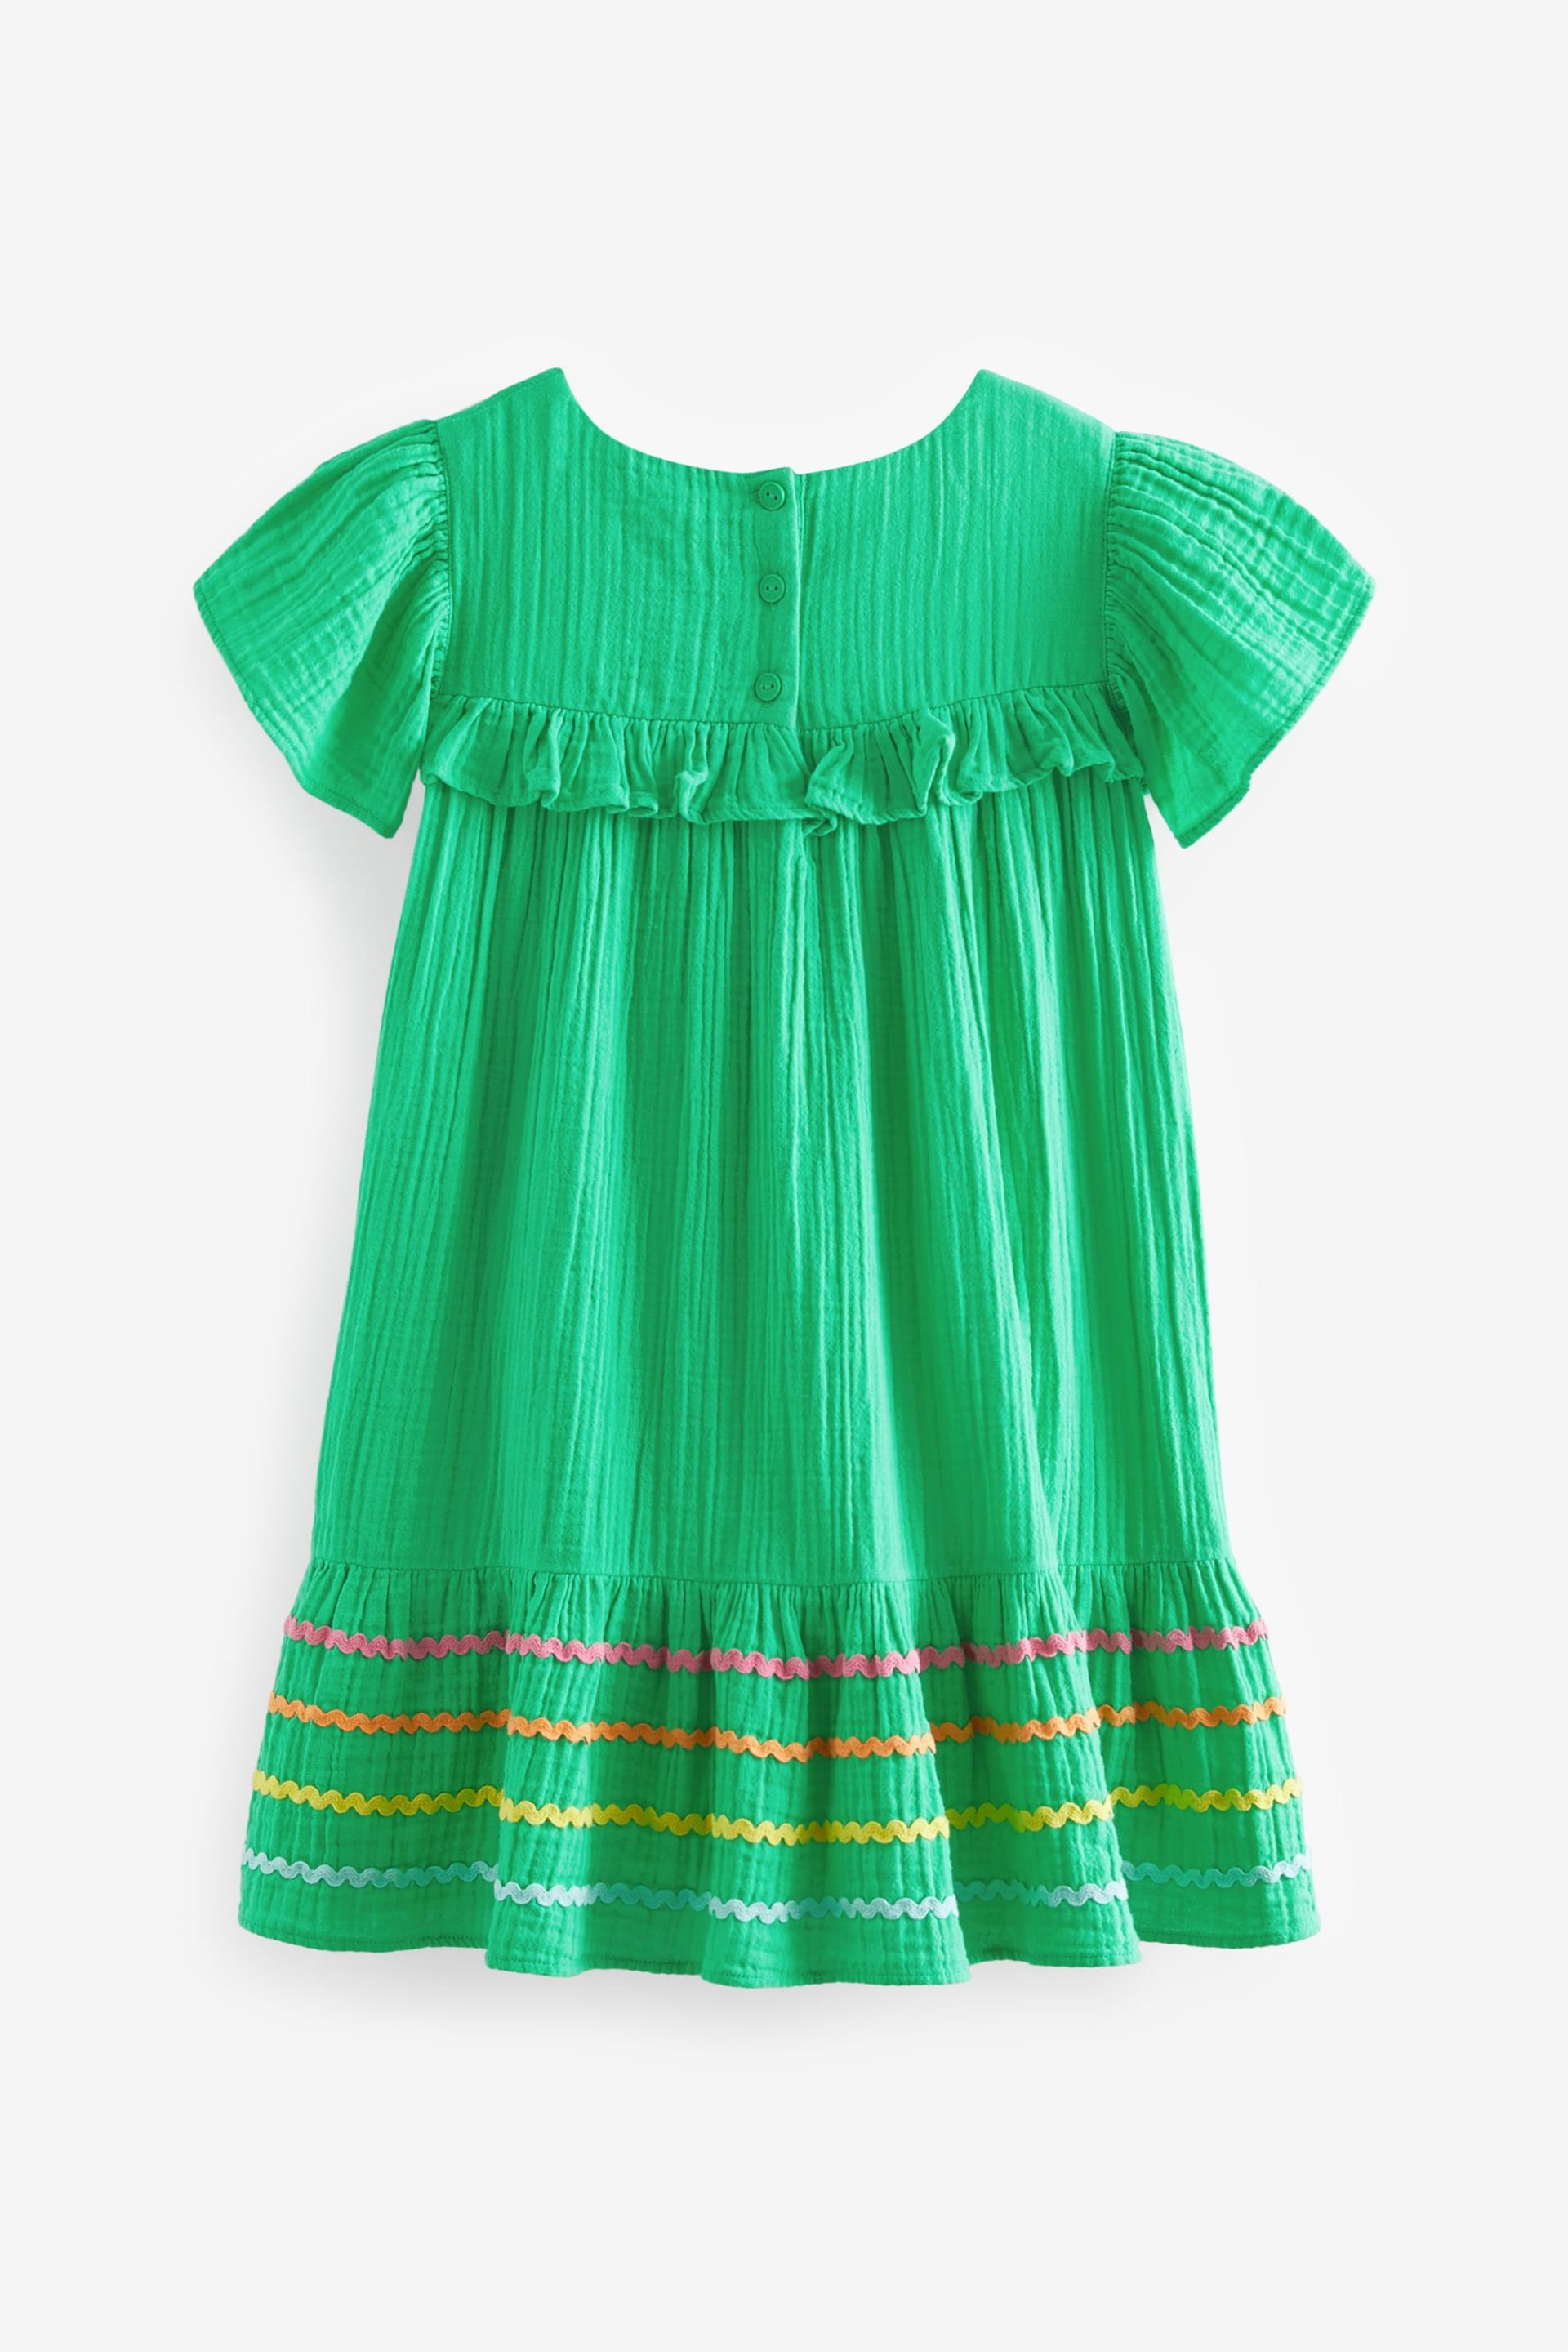 Little Bird by Jools Oliver Green Floral Embroidered Frill Dress - Image 6 of 6